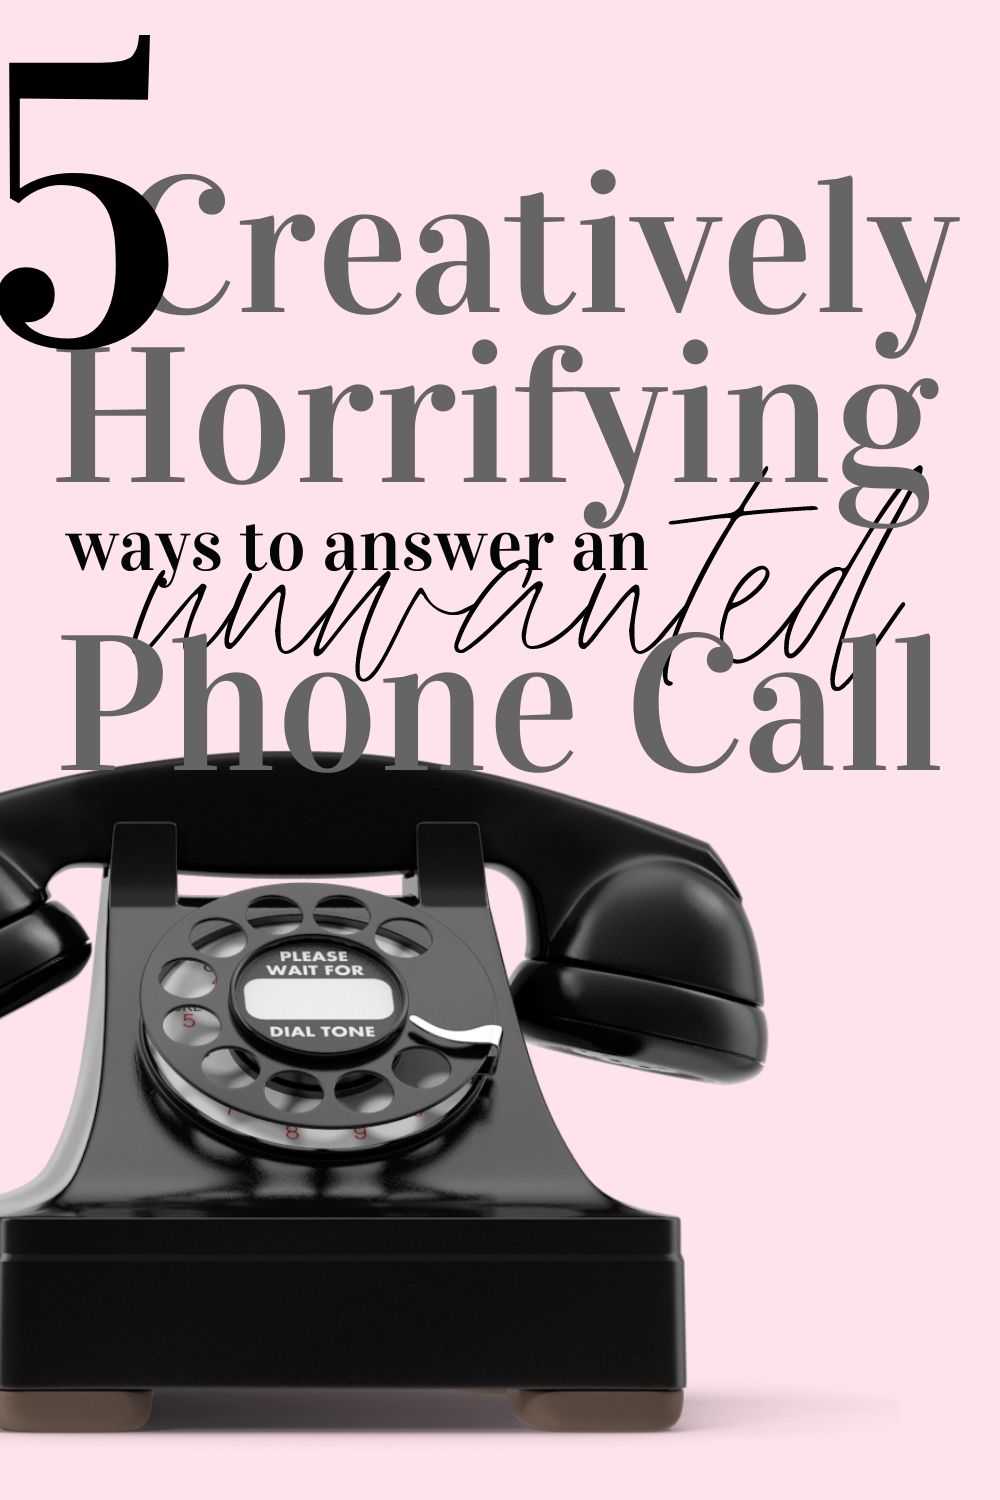 Black and white photo of an old black rotary phone on a pink background: 5 Creatively Horrifying ways to answer an Unwanted Phone Call with a picture of a black rotary phone